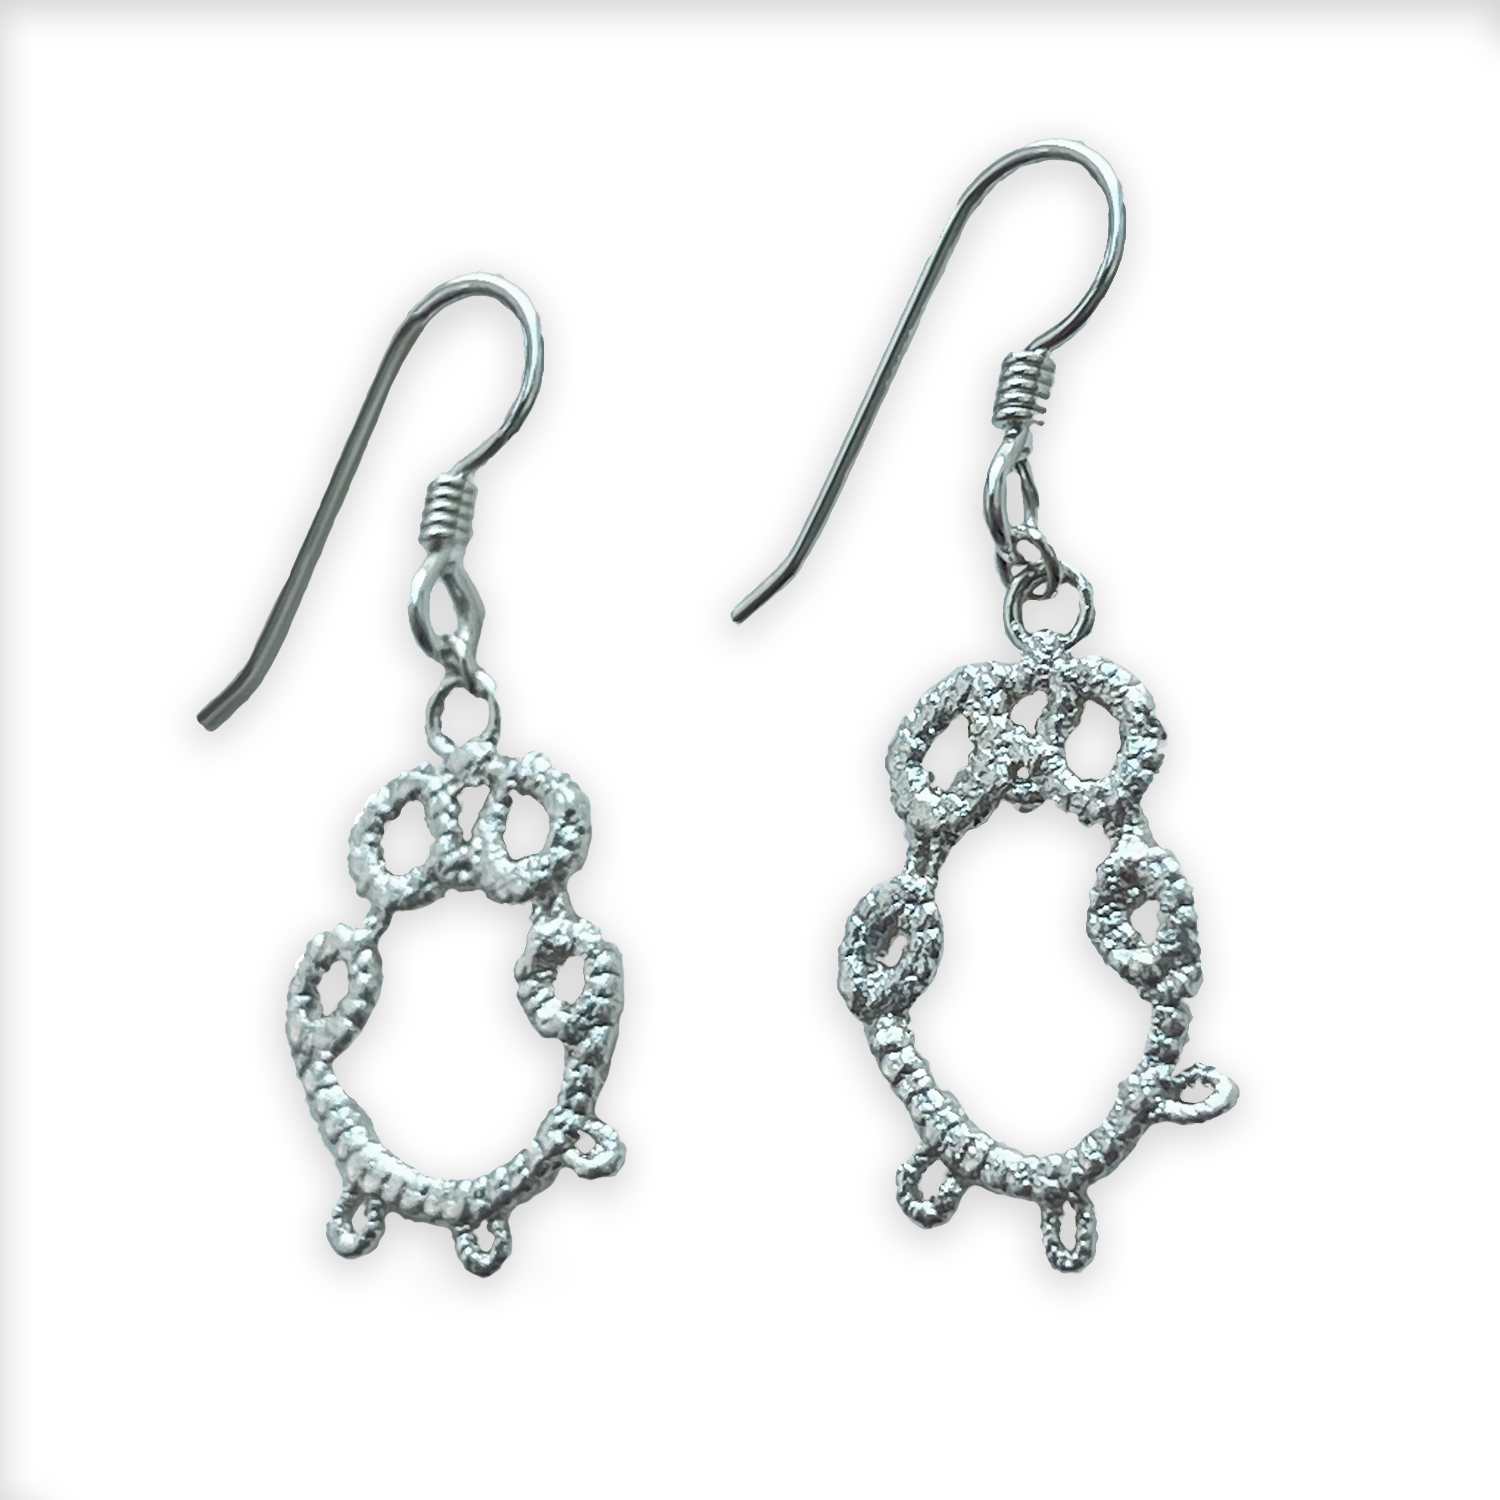 Irish tatted lace earrings in sterling silver on French hooks.